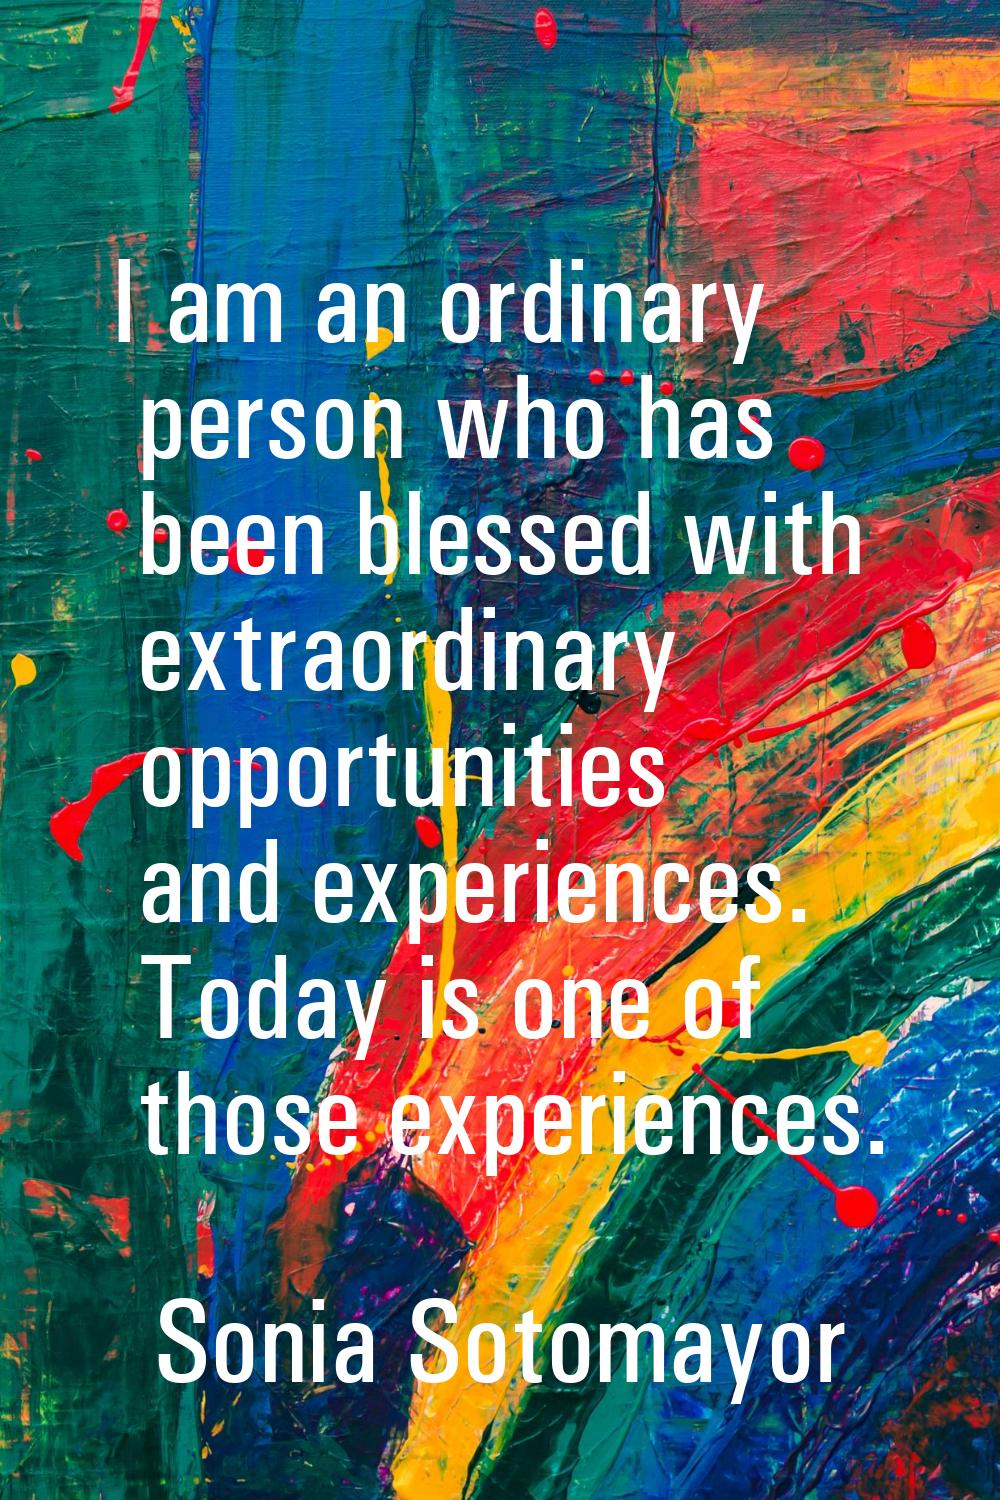 I am an ordinary person who has been blessed with extraordinary opportunities and experiences. Toda